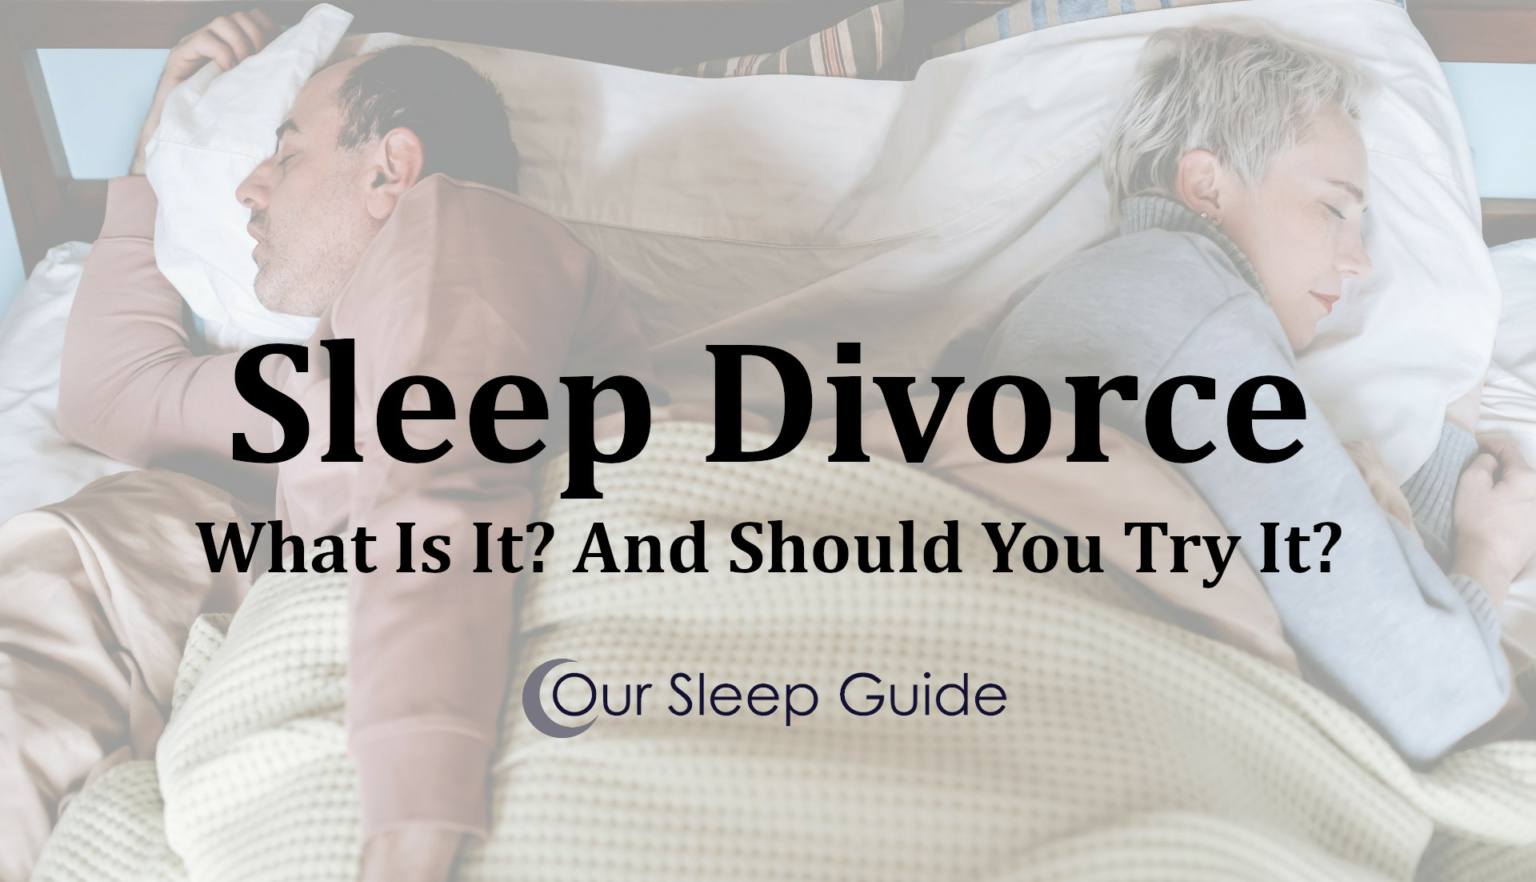 Sleep Divorce What Is It? And Should You Try It?